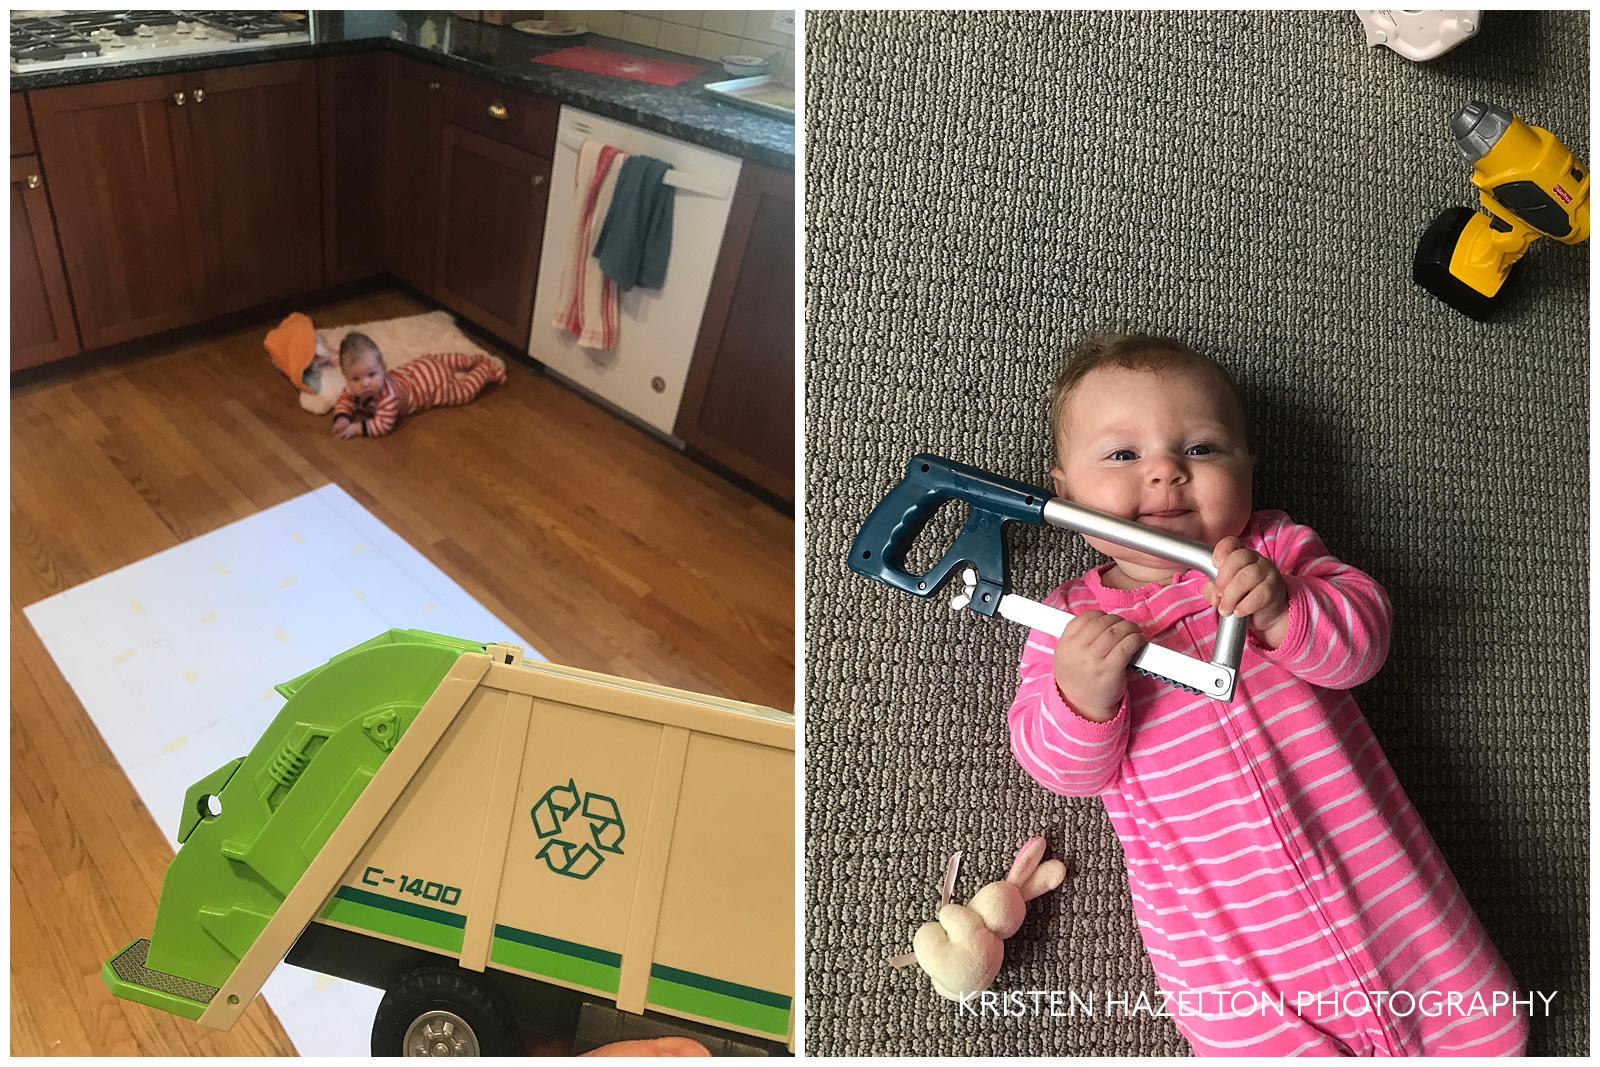 Baby supervising a 5x scale garbage truck drawing, and playing with a toy saw